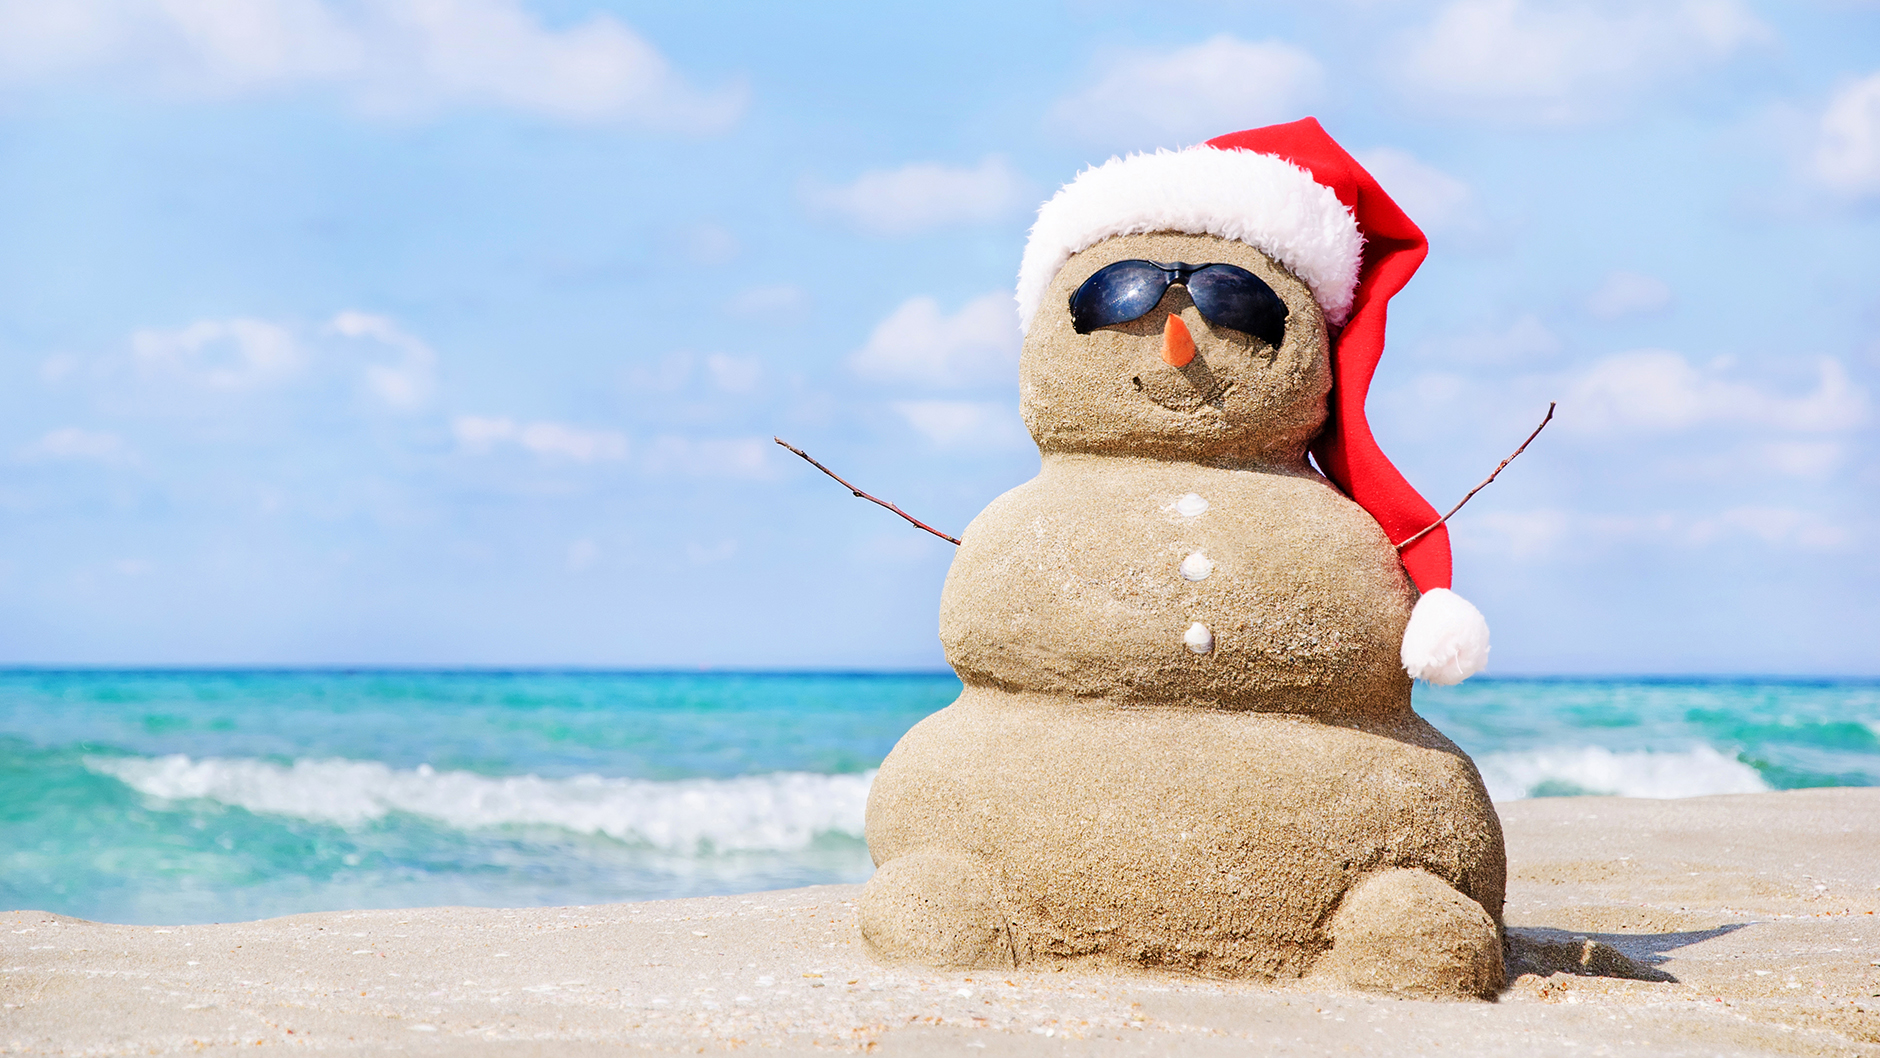 sand snowman on beach waring sunglasses and Santa hat with surf in background